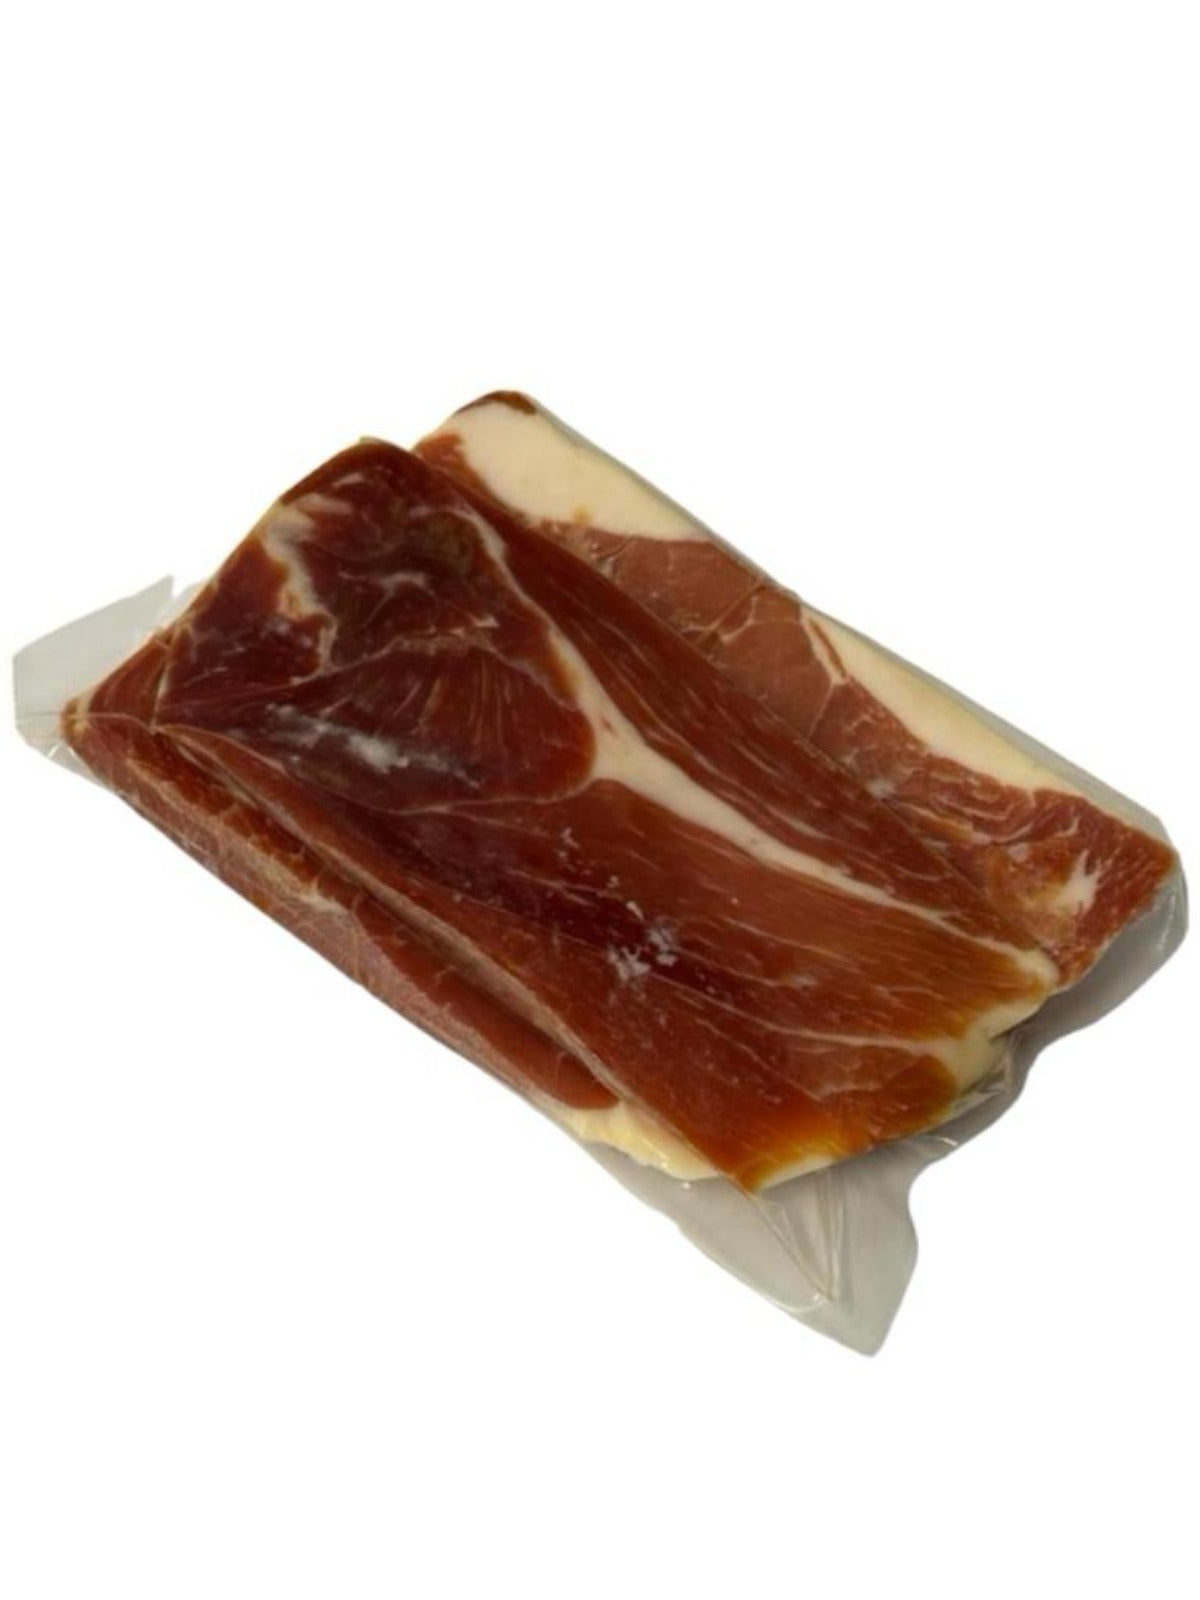 Puntas de Jamon no bones for croquetas packet random weight approx. 525g packet. Regular price $17.50 AUD [You are guaranteed to receive at least 500g of product, equivalent price of $35.00 per kg.]